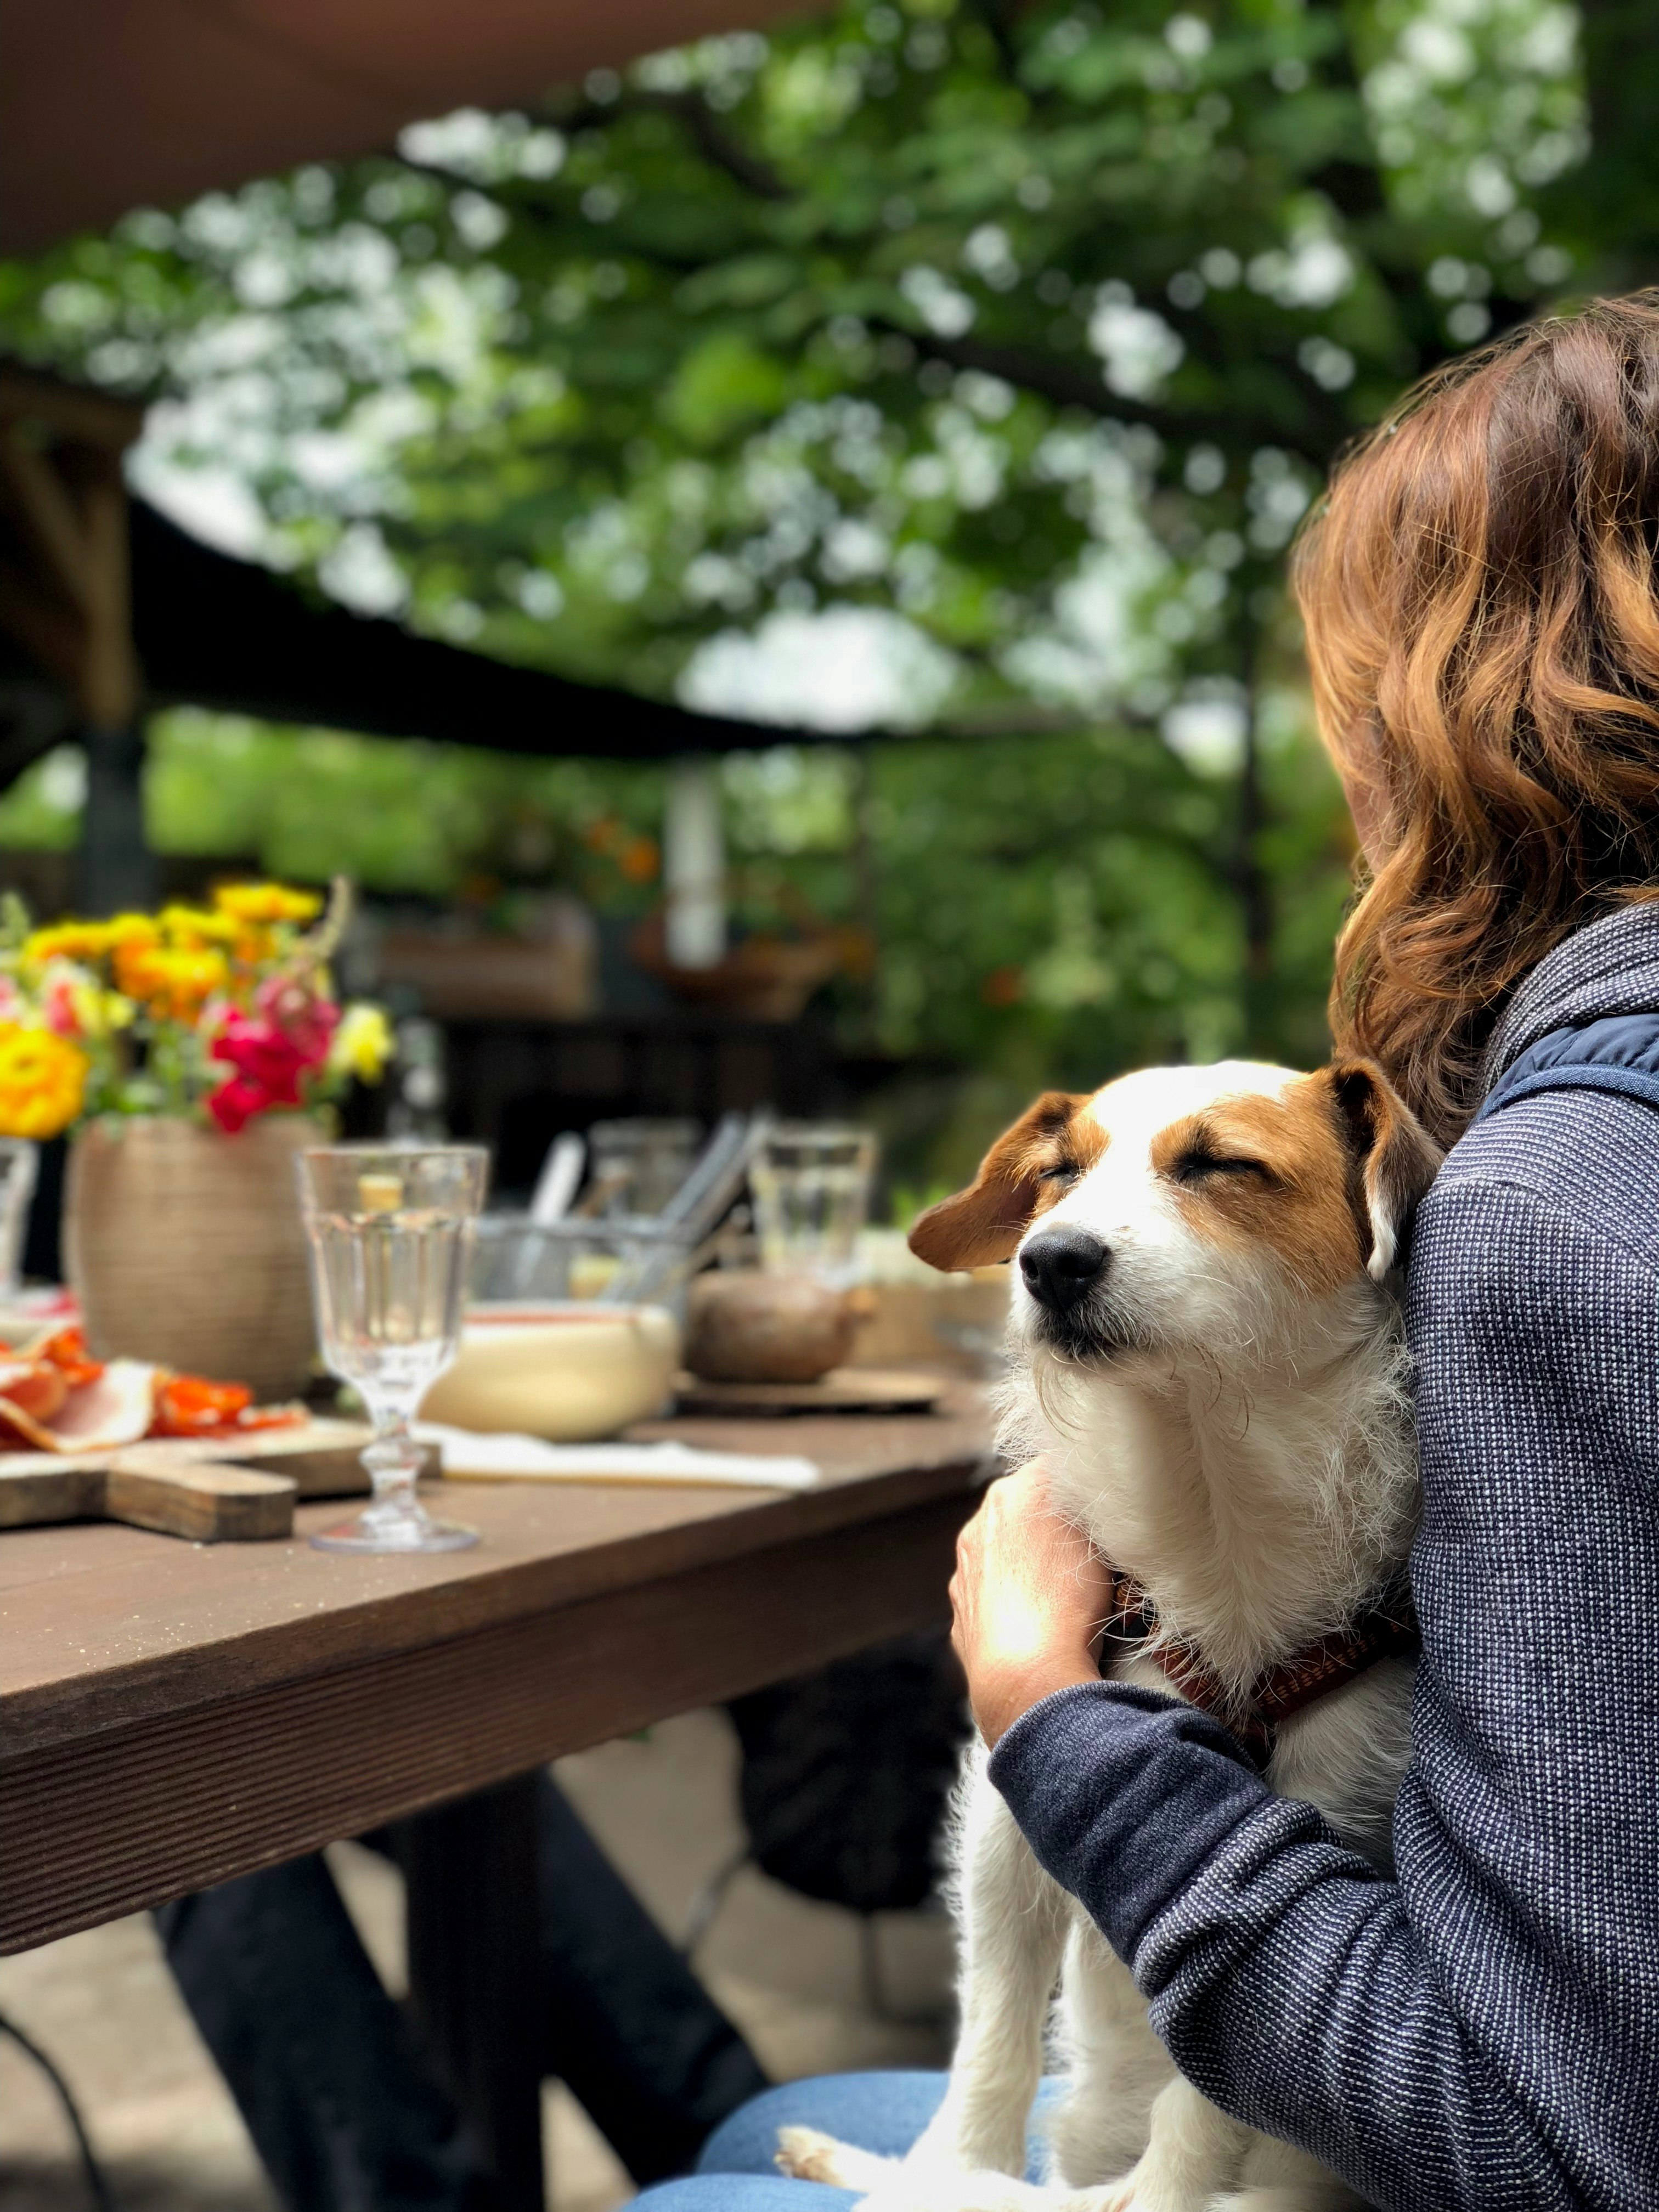 A woman sitting at a picnic table with a terrier type dog in her lap